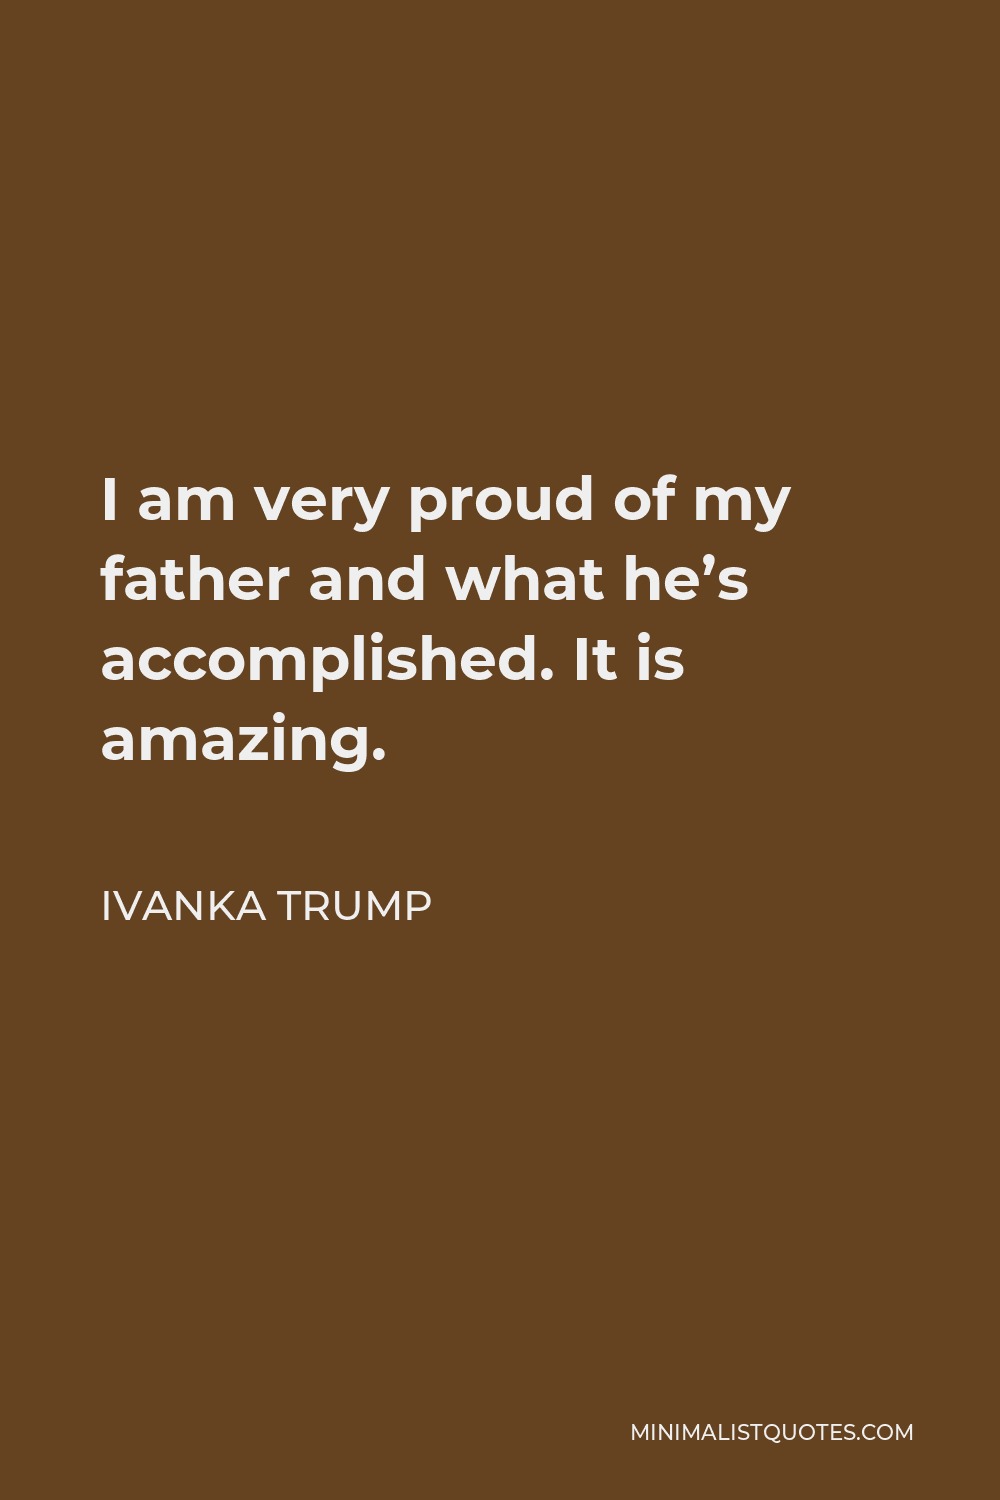 Ivanka Trump Quote - I am very proud of my father and what he’s accomplished. It is amazing.